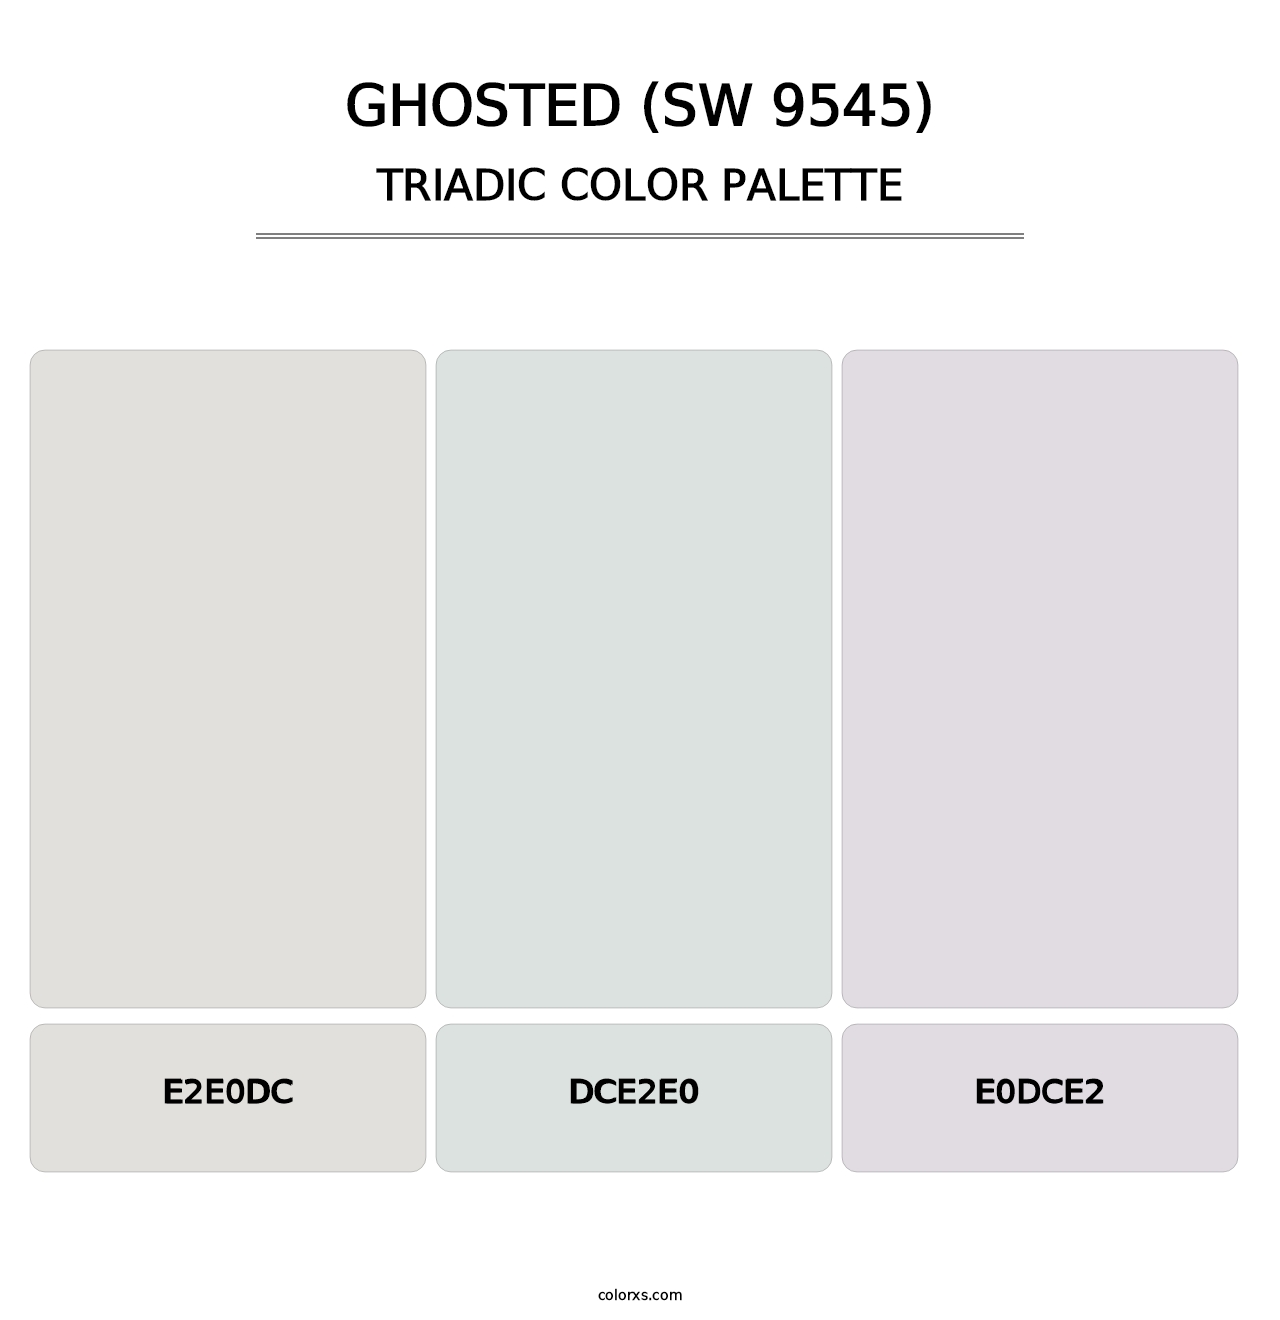 Ghosted (SW 9545) - Triadic Color Palette